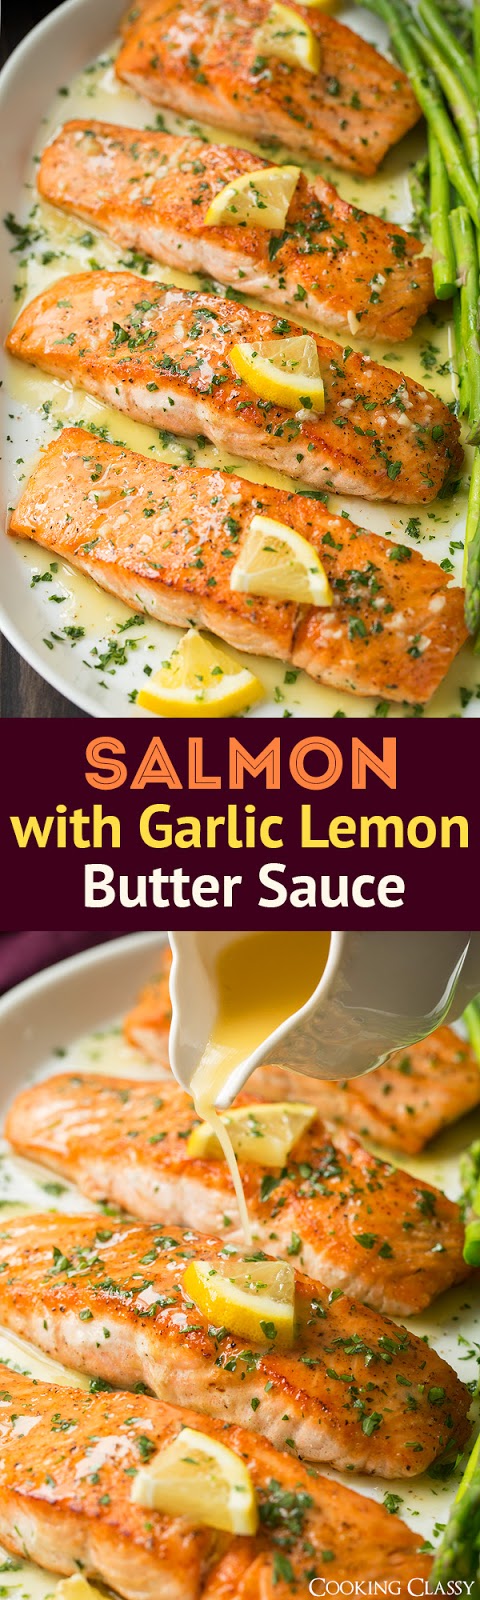 Skillet Seared Salmon with Garlic Lemon Butter Sauce | My Album Of Recipes